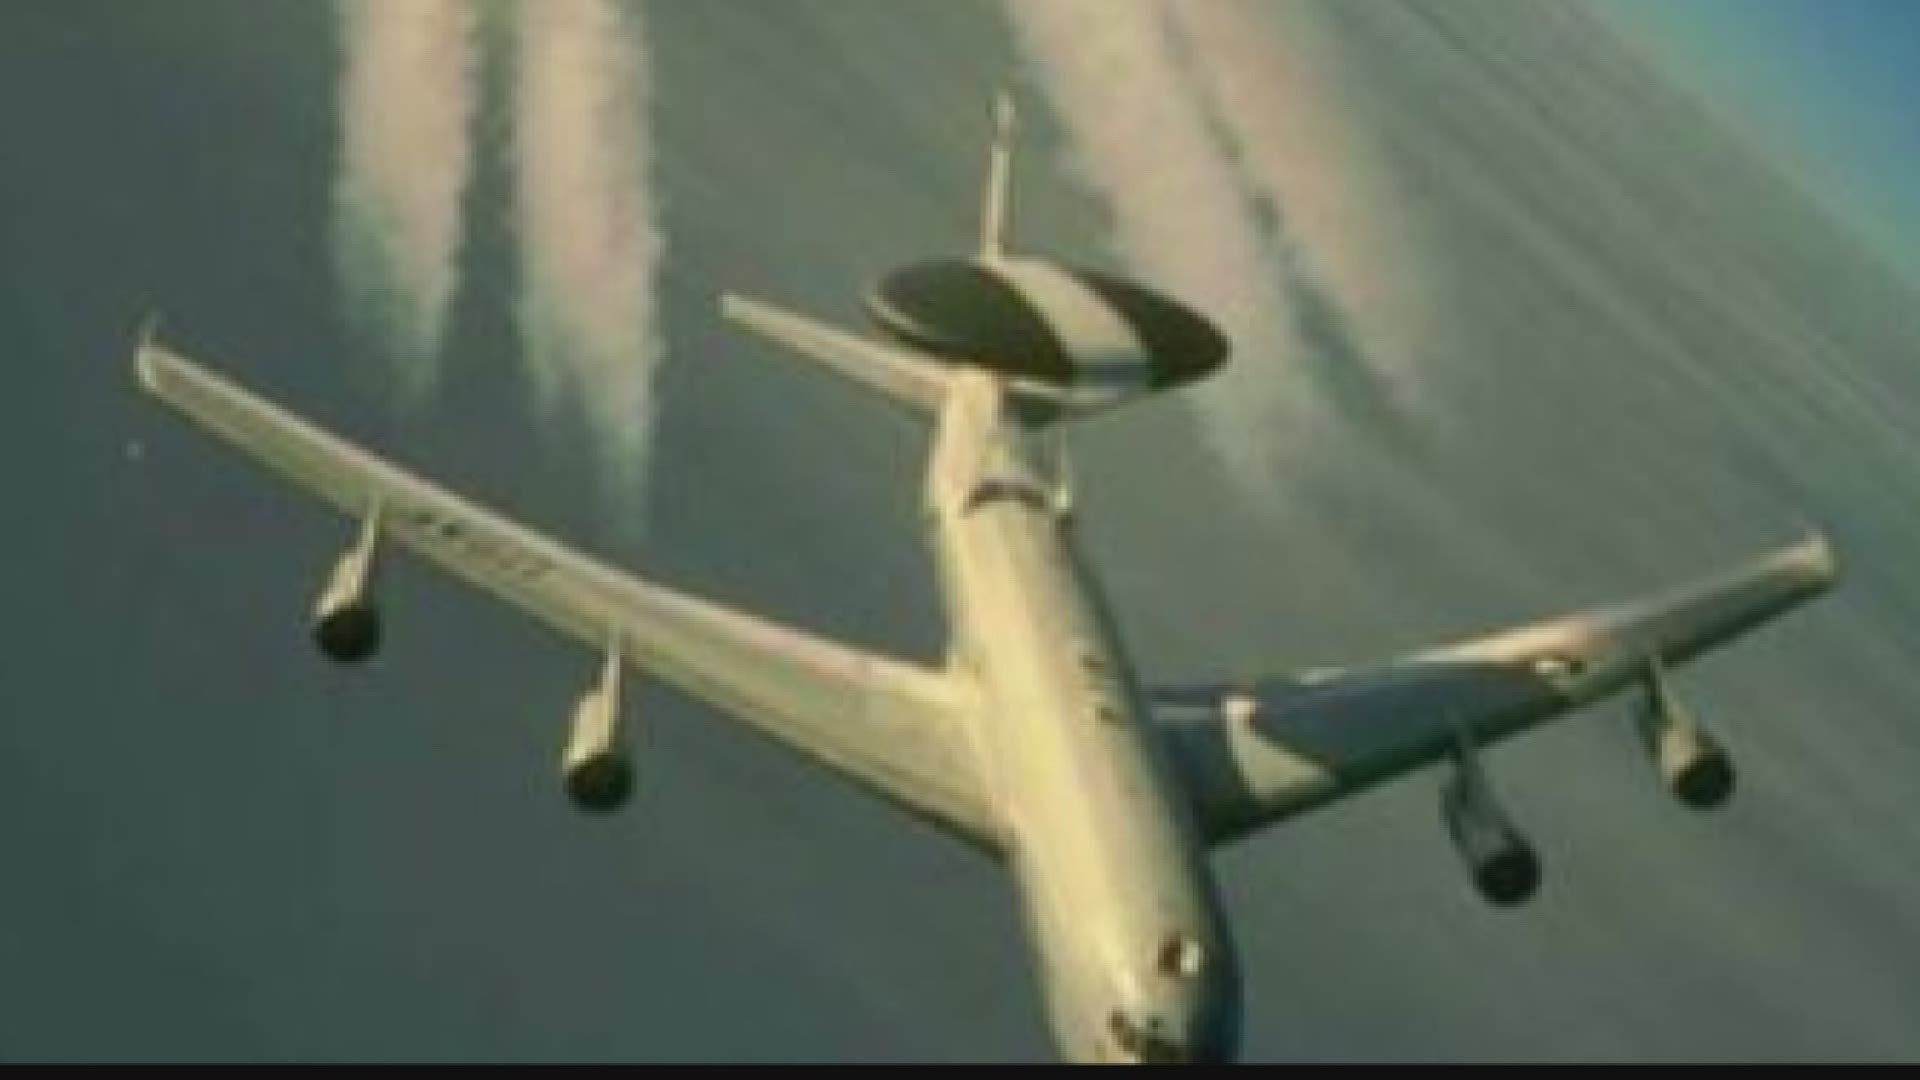 Are the trails behind airplanes harmless contrails, or is the government spraying us with chemicals?